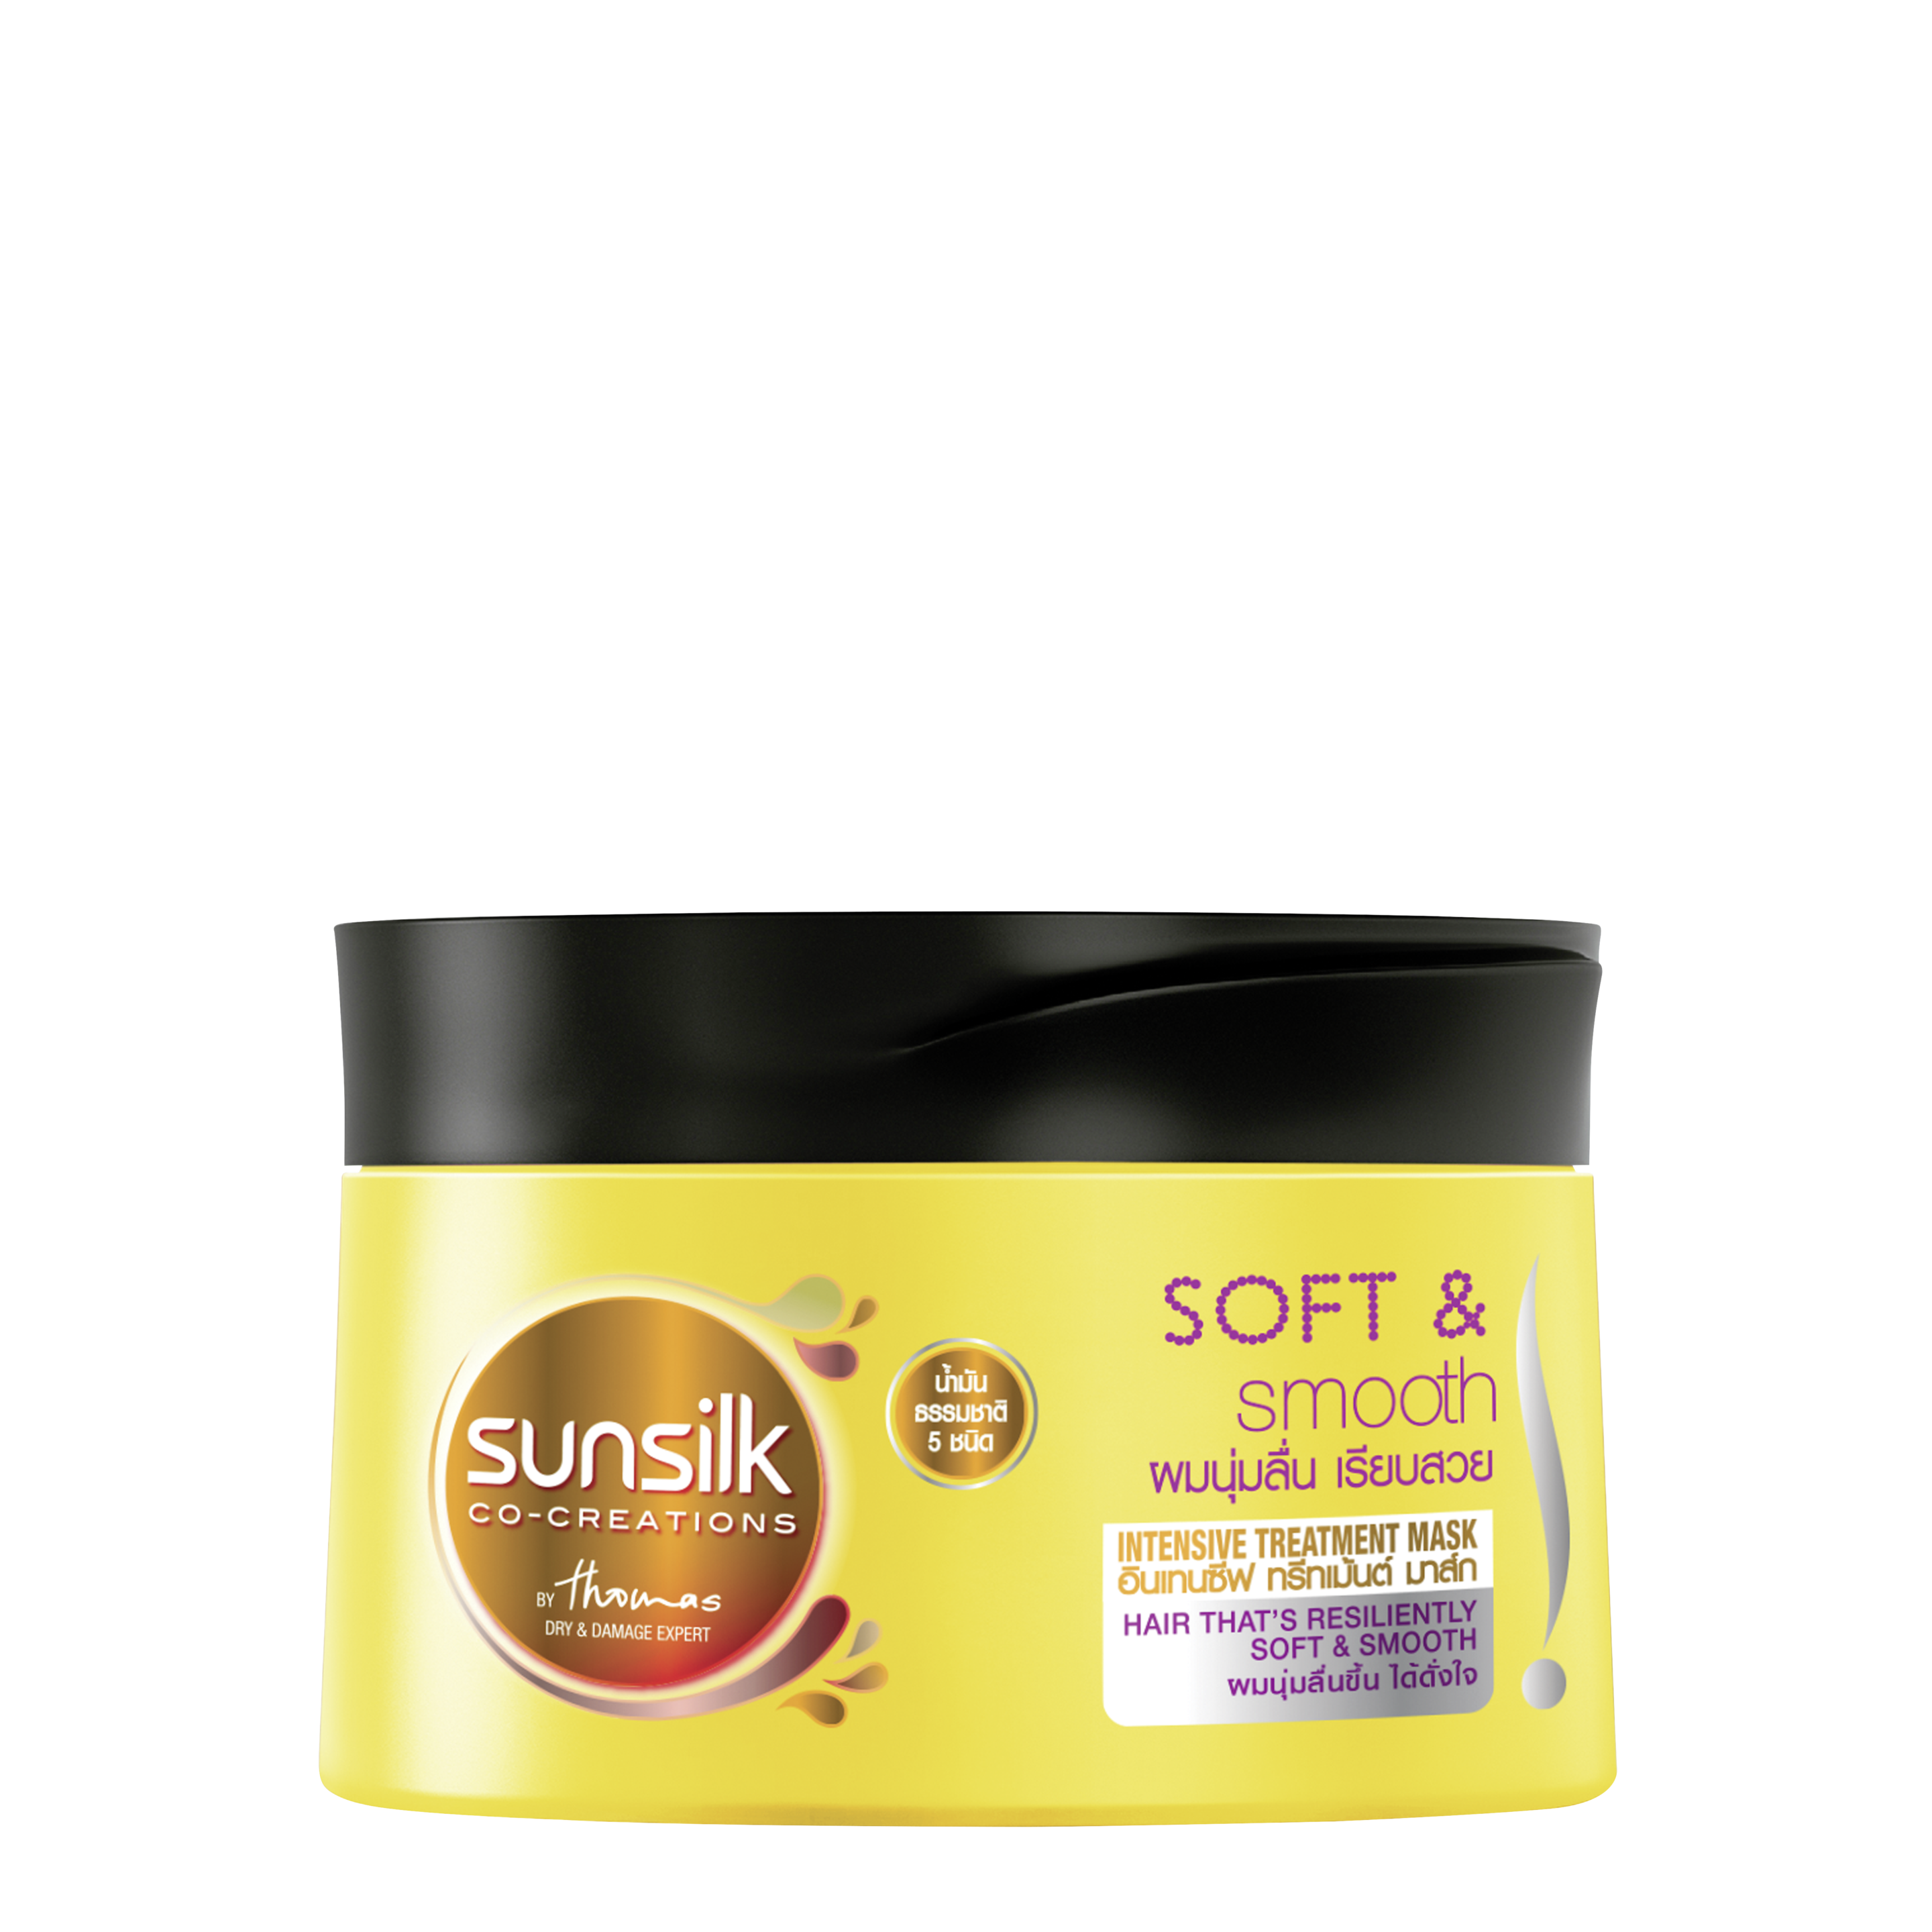 Sunsilk Soft and Smooth Intensive Treatment Mask 200g front of pack image